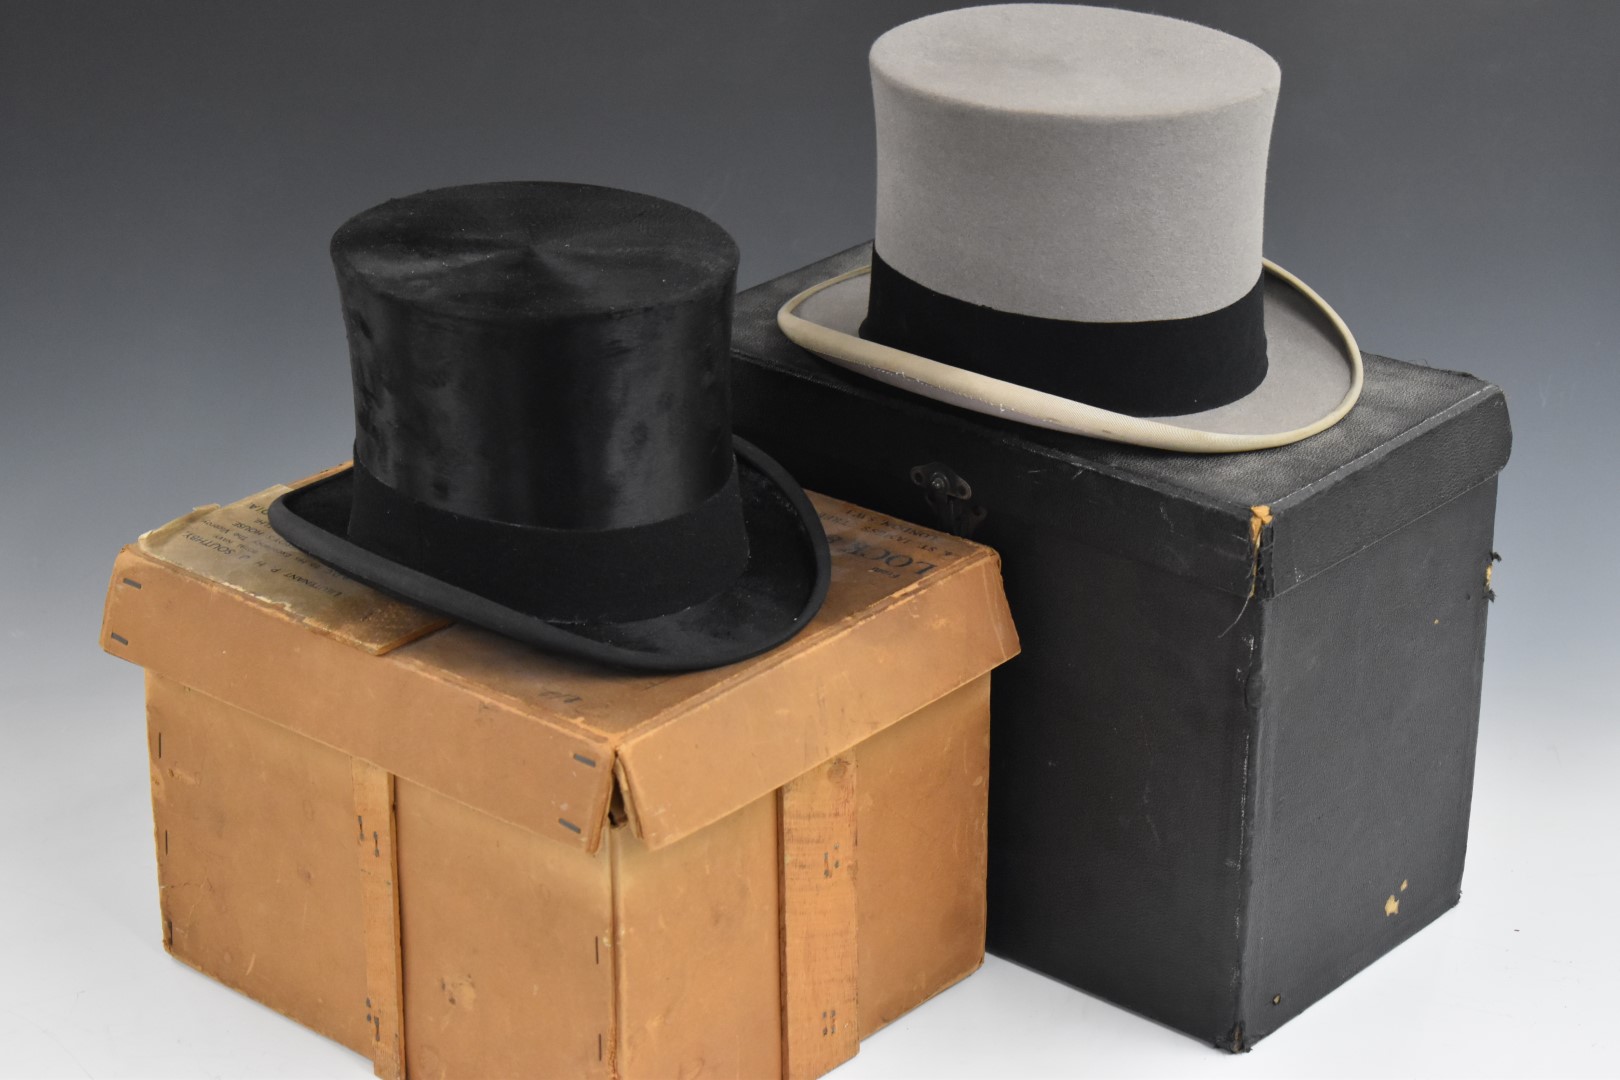 Two vintage James Lock silk top hats, one in original carry case, the other in a vintage Lock & Co